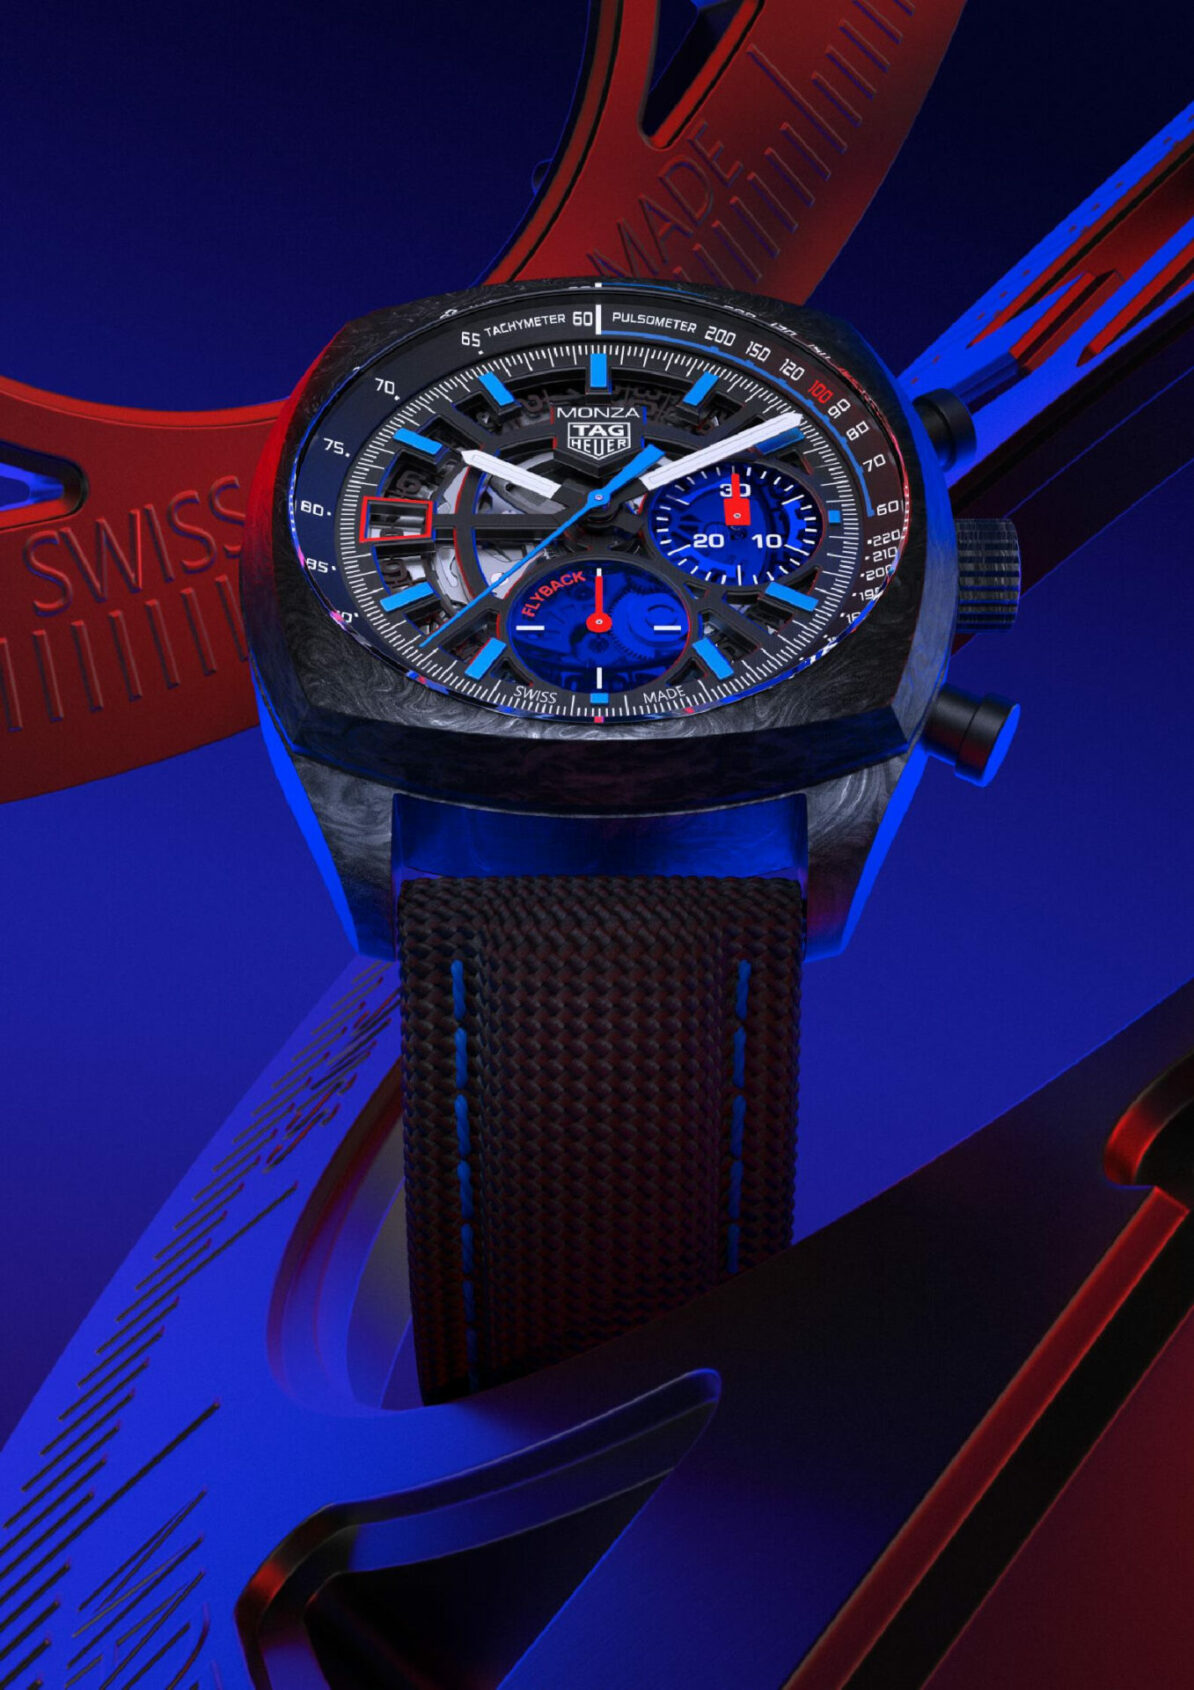 TAG Heuer eco-initiatives pick up speed - LVMH